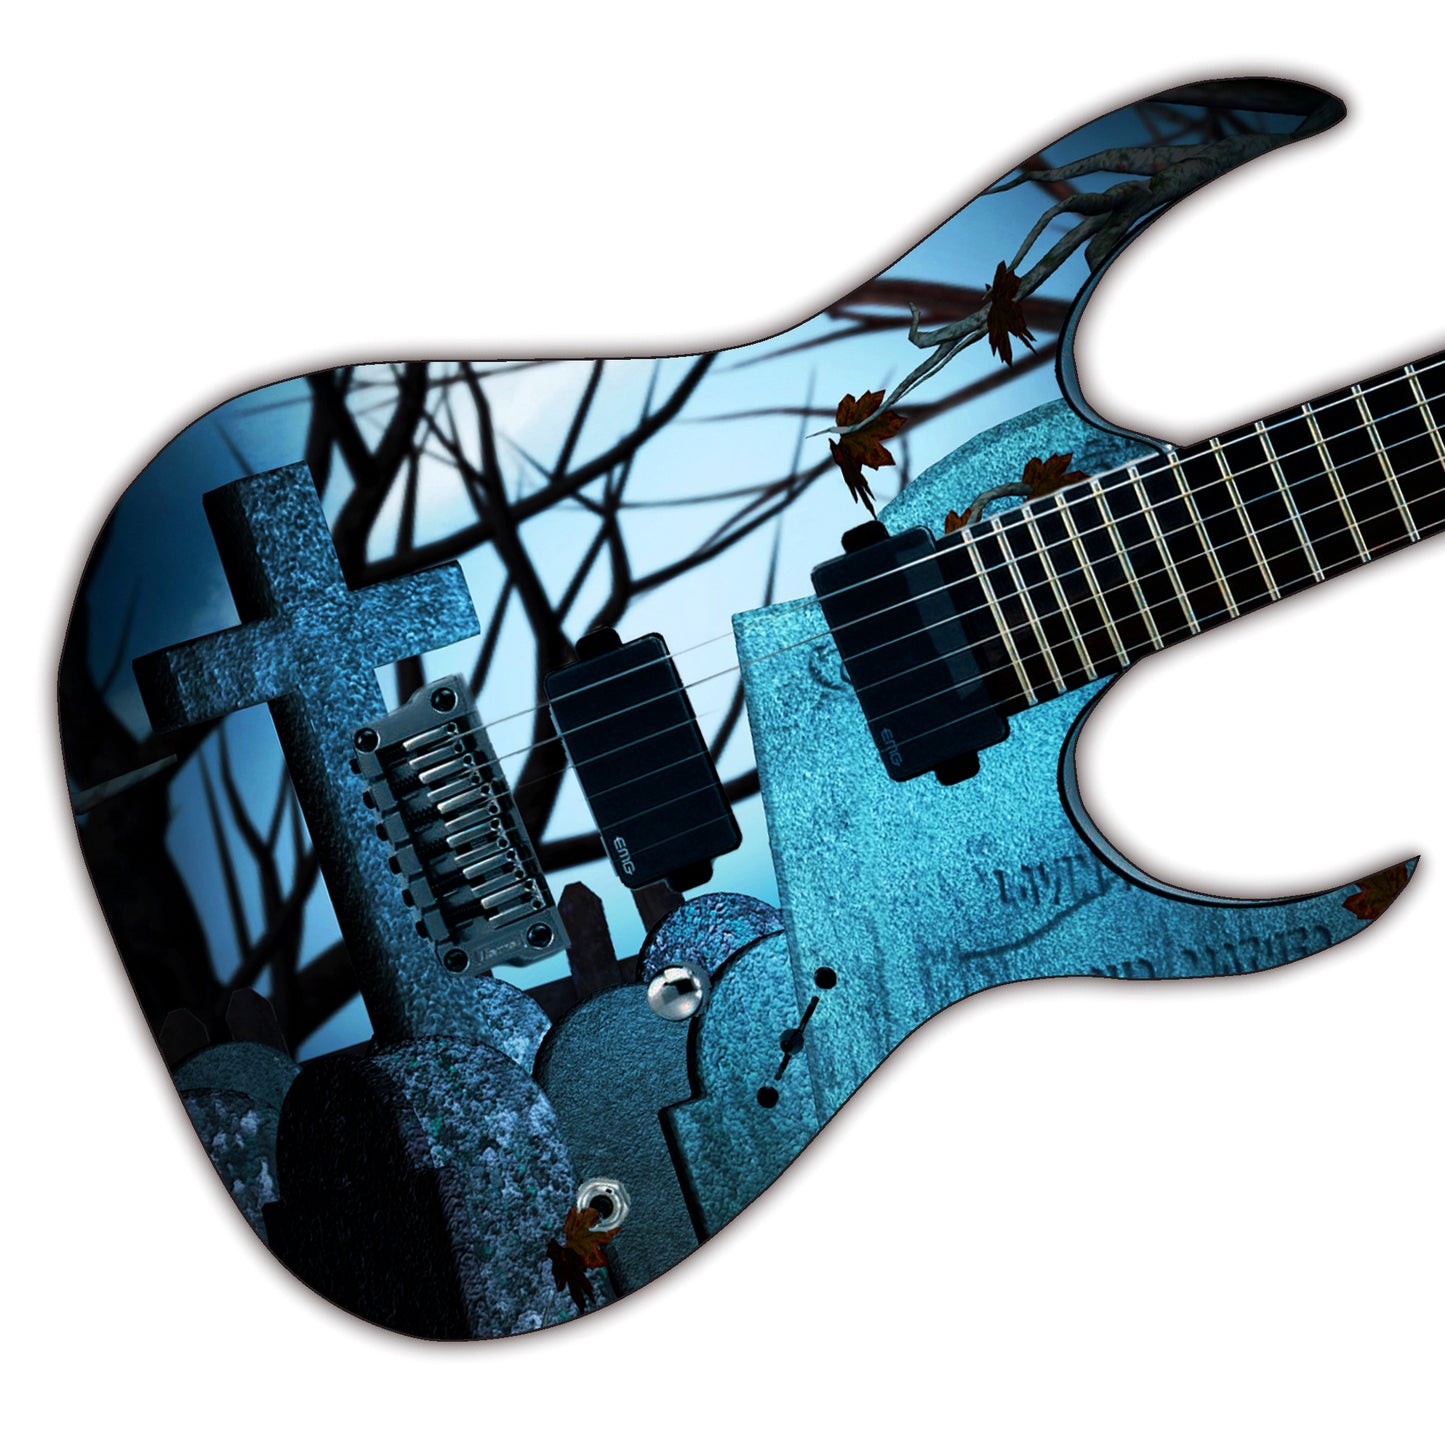 Guitar, Bass or Acoustic Skin Wrap Laminated Vinyl Decal Sticker The Graveyard GS75